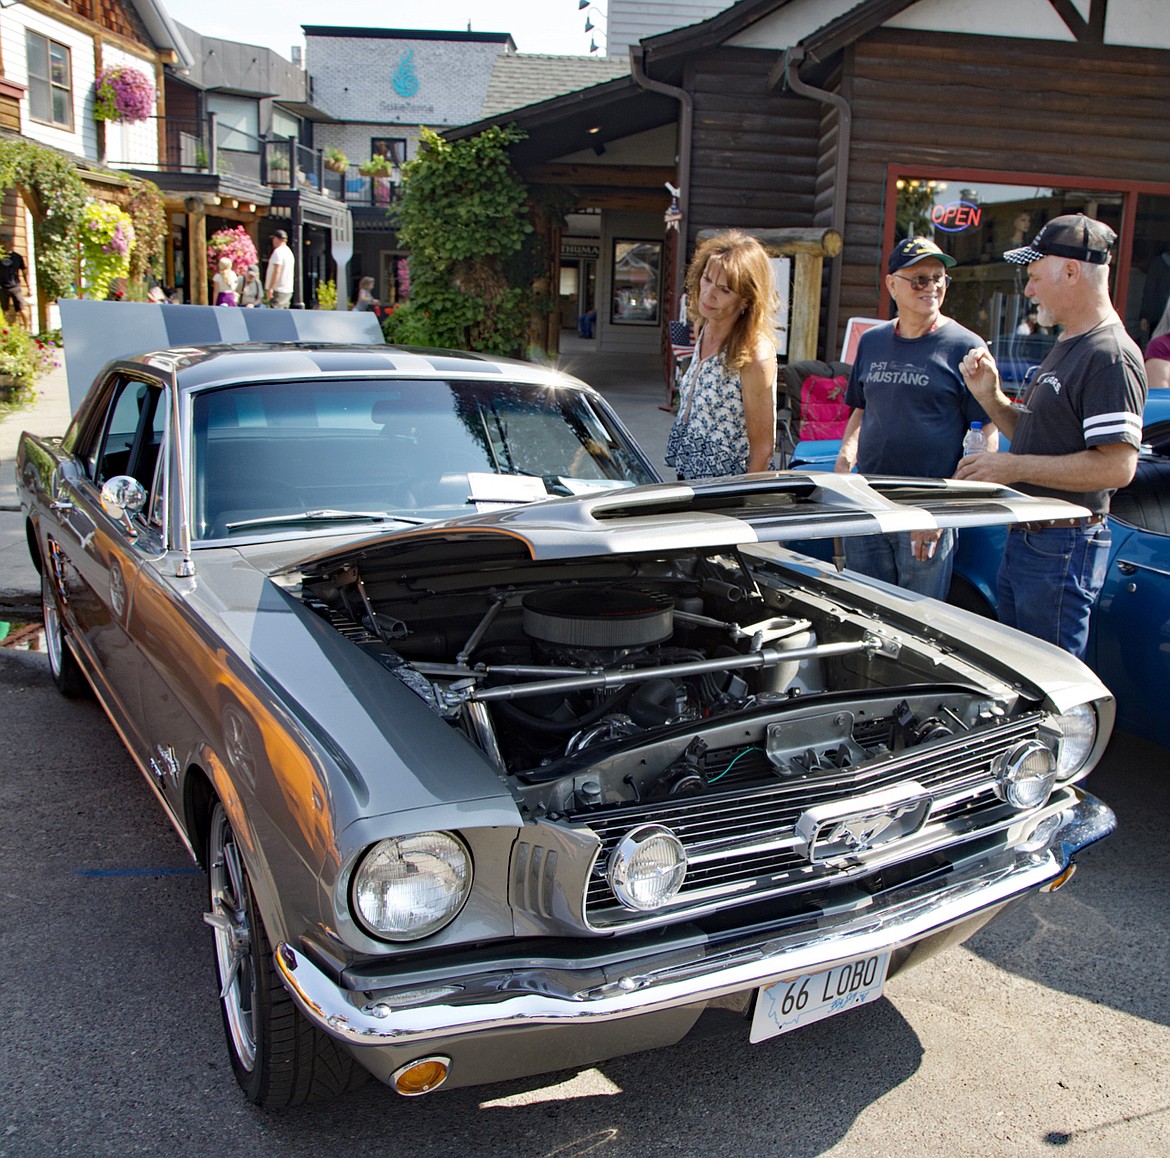 Curtis Wallace of Bigfork brought his 1966 Ford Mustang to the show. (Kay Bjork photo)